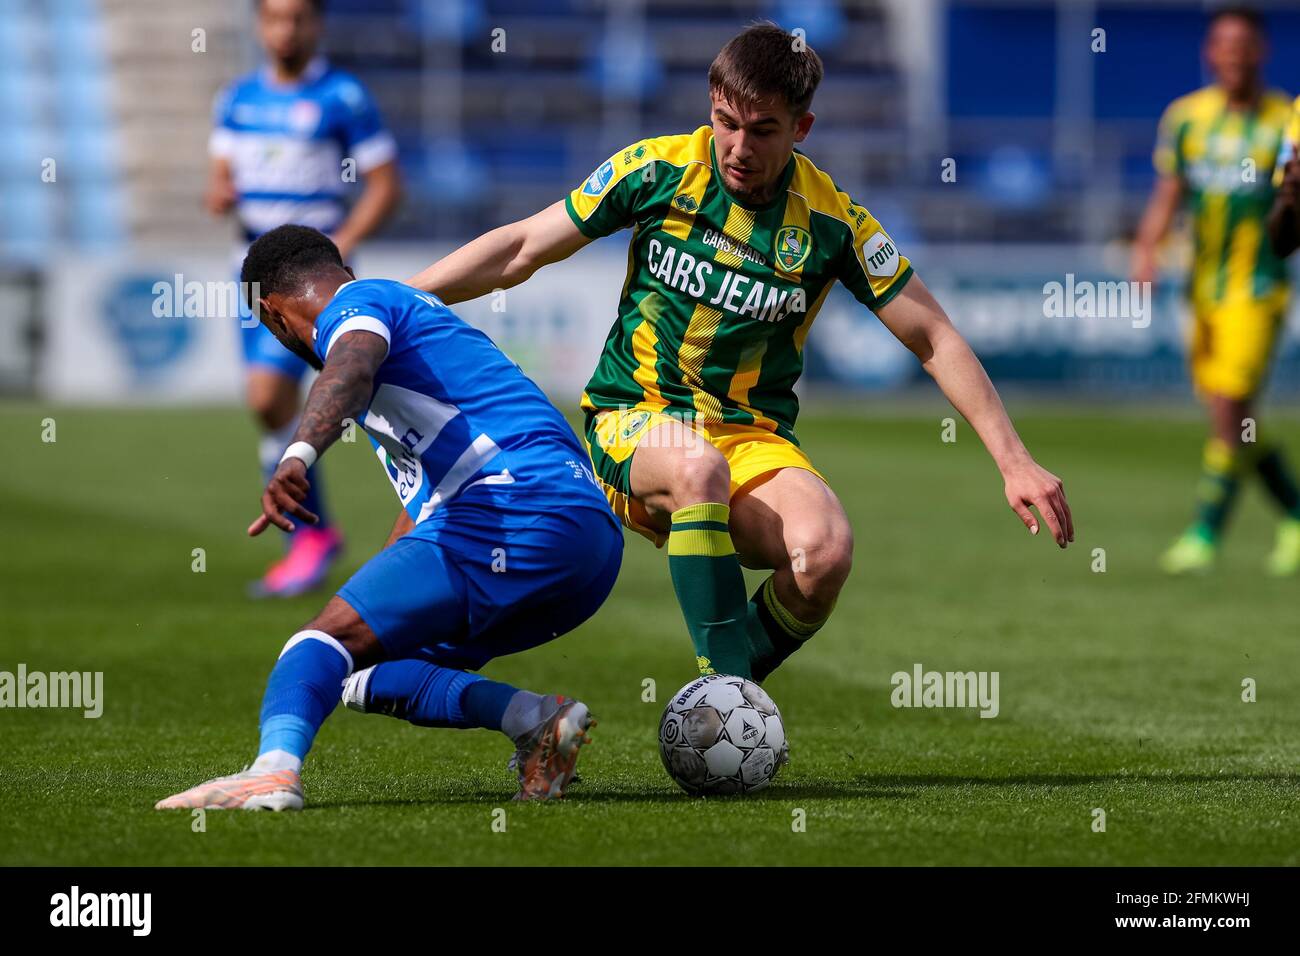 ZWOLLE, NETHERLANDS - MAY 9: Kenneth Paal of PEC Zwolle and Amar Catic of ADO Den Haag during the Dutch Eredivisie match between PEC Zwolle and ADO De Stock Photo